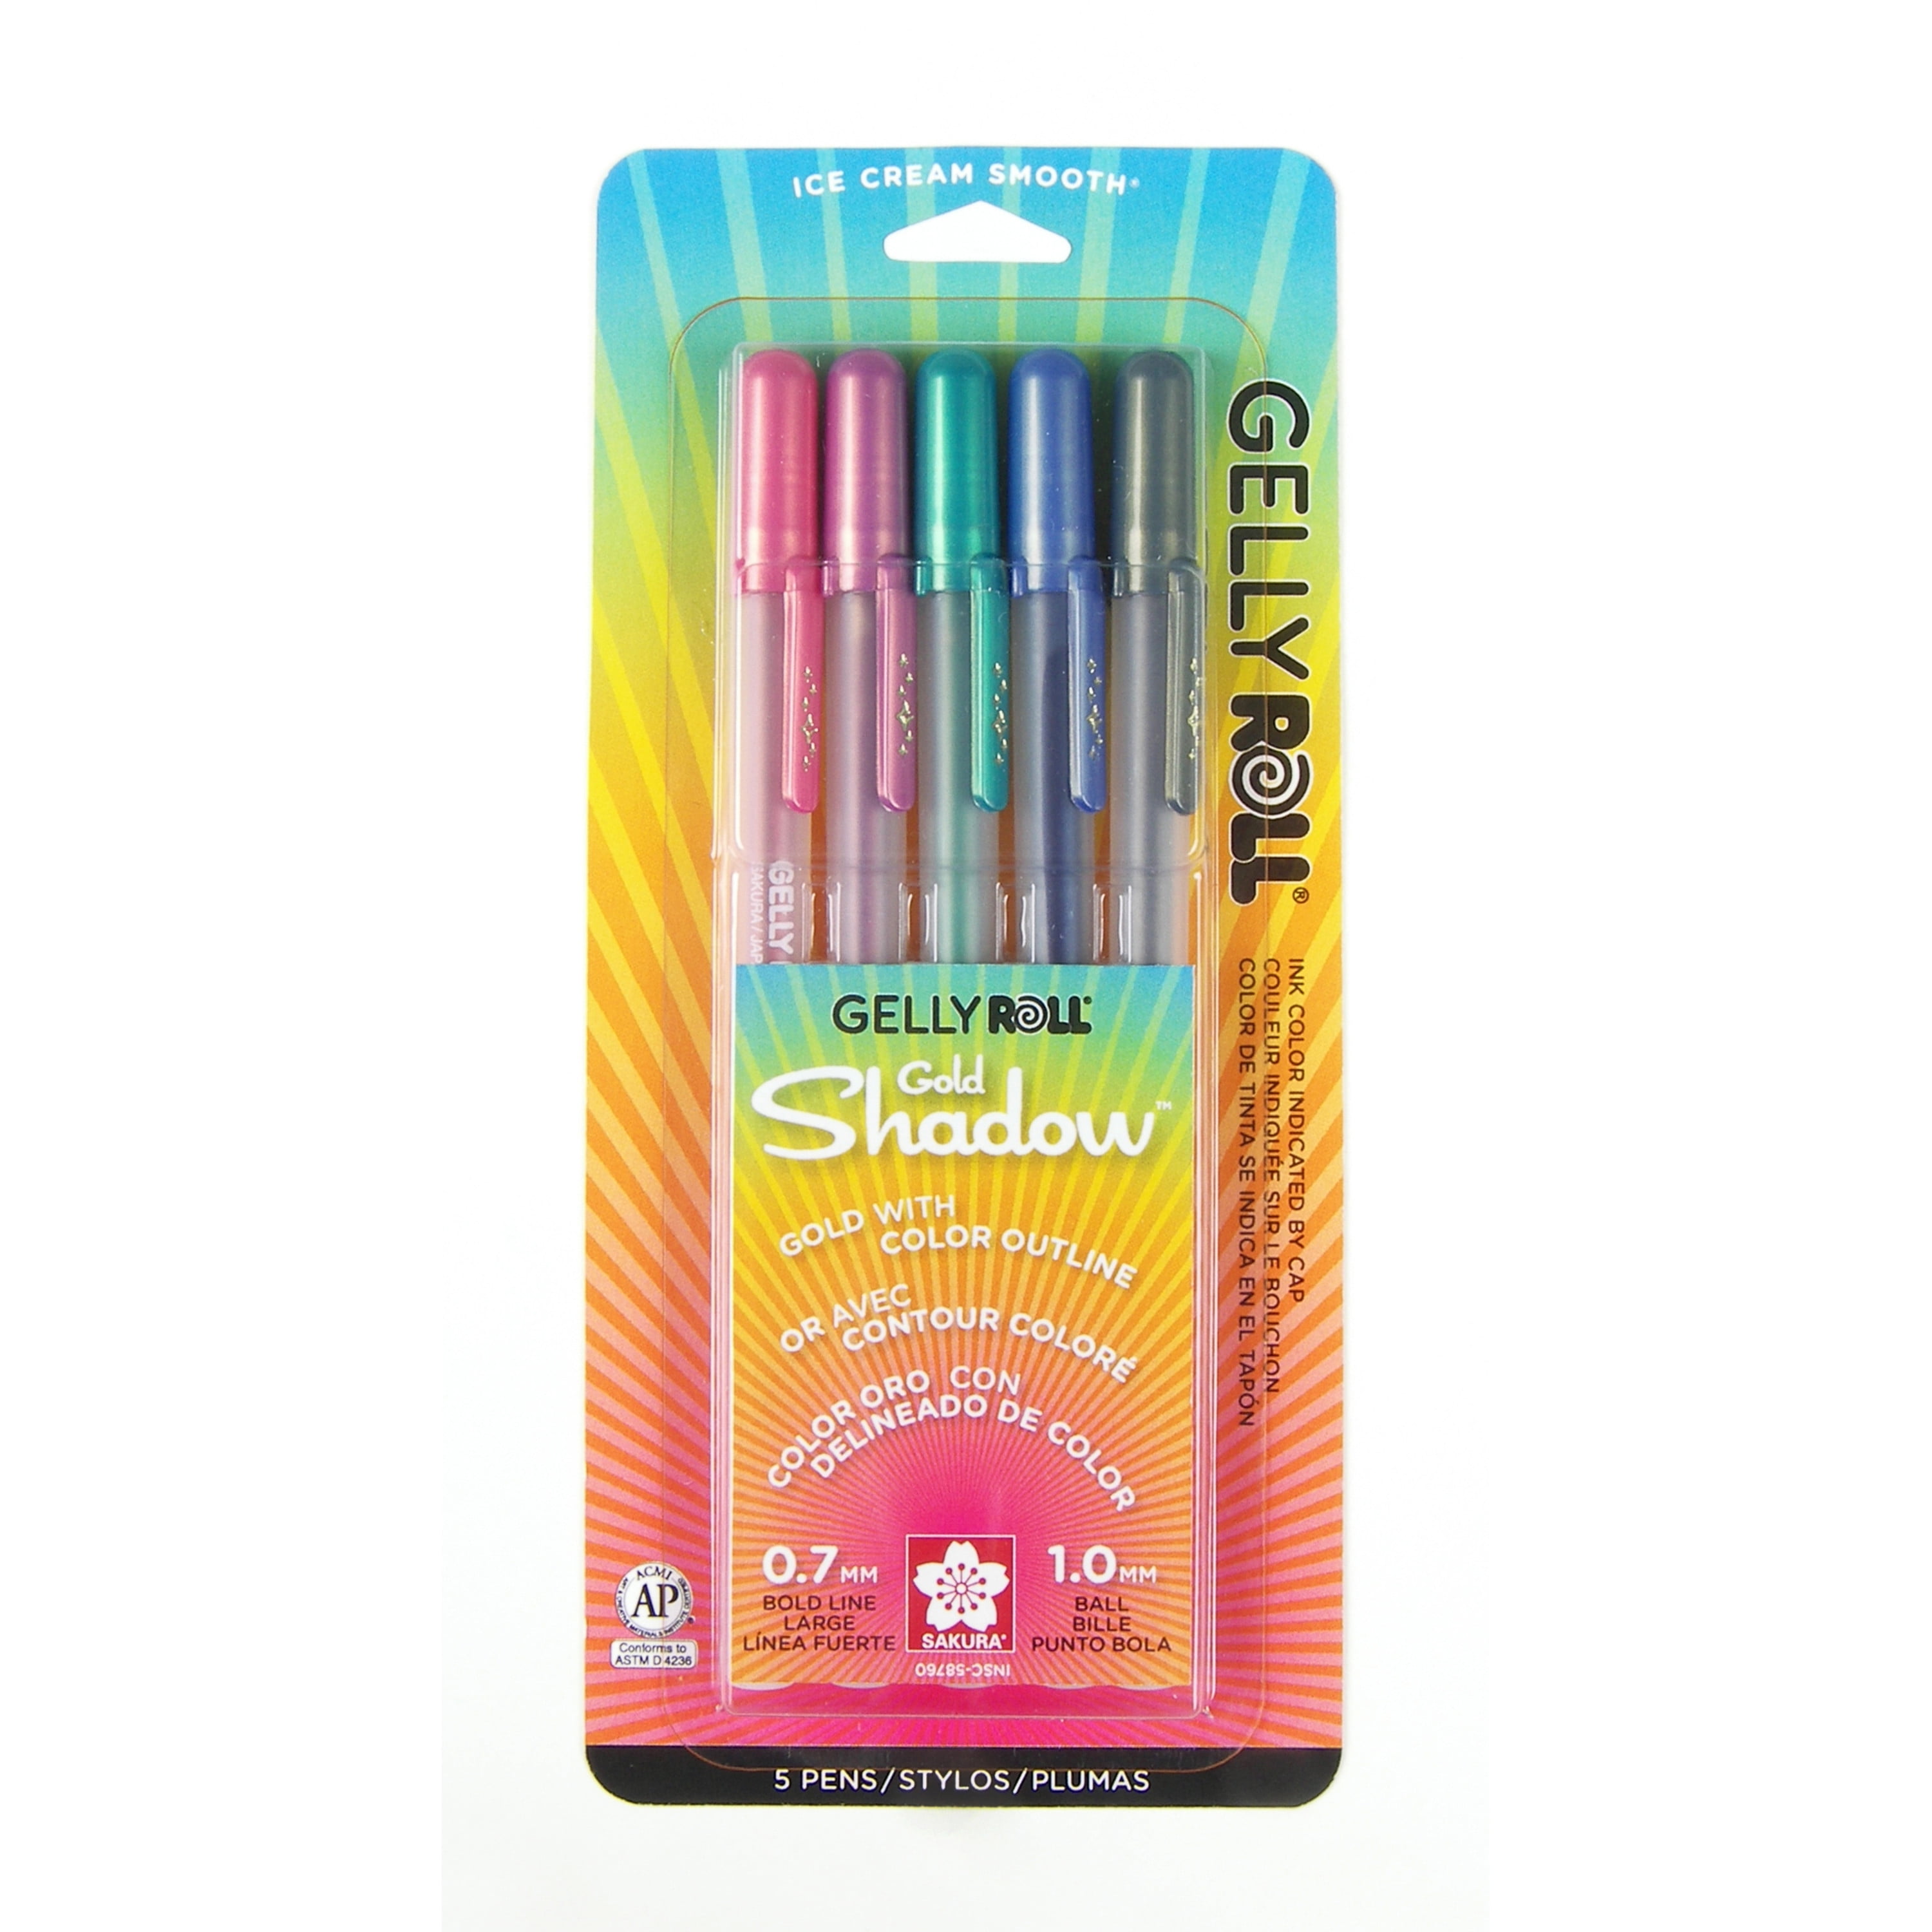 Disney Stitch Gel Pens for Kids Colored Pens with Storage Case 24 Pack 